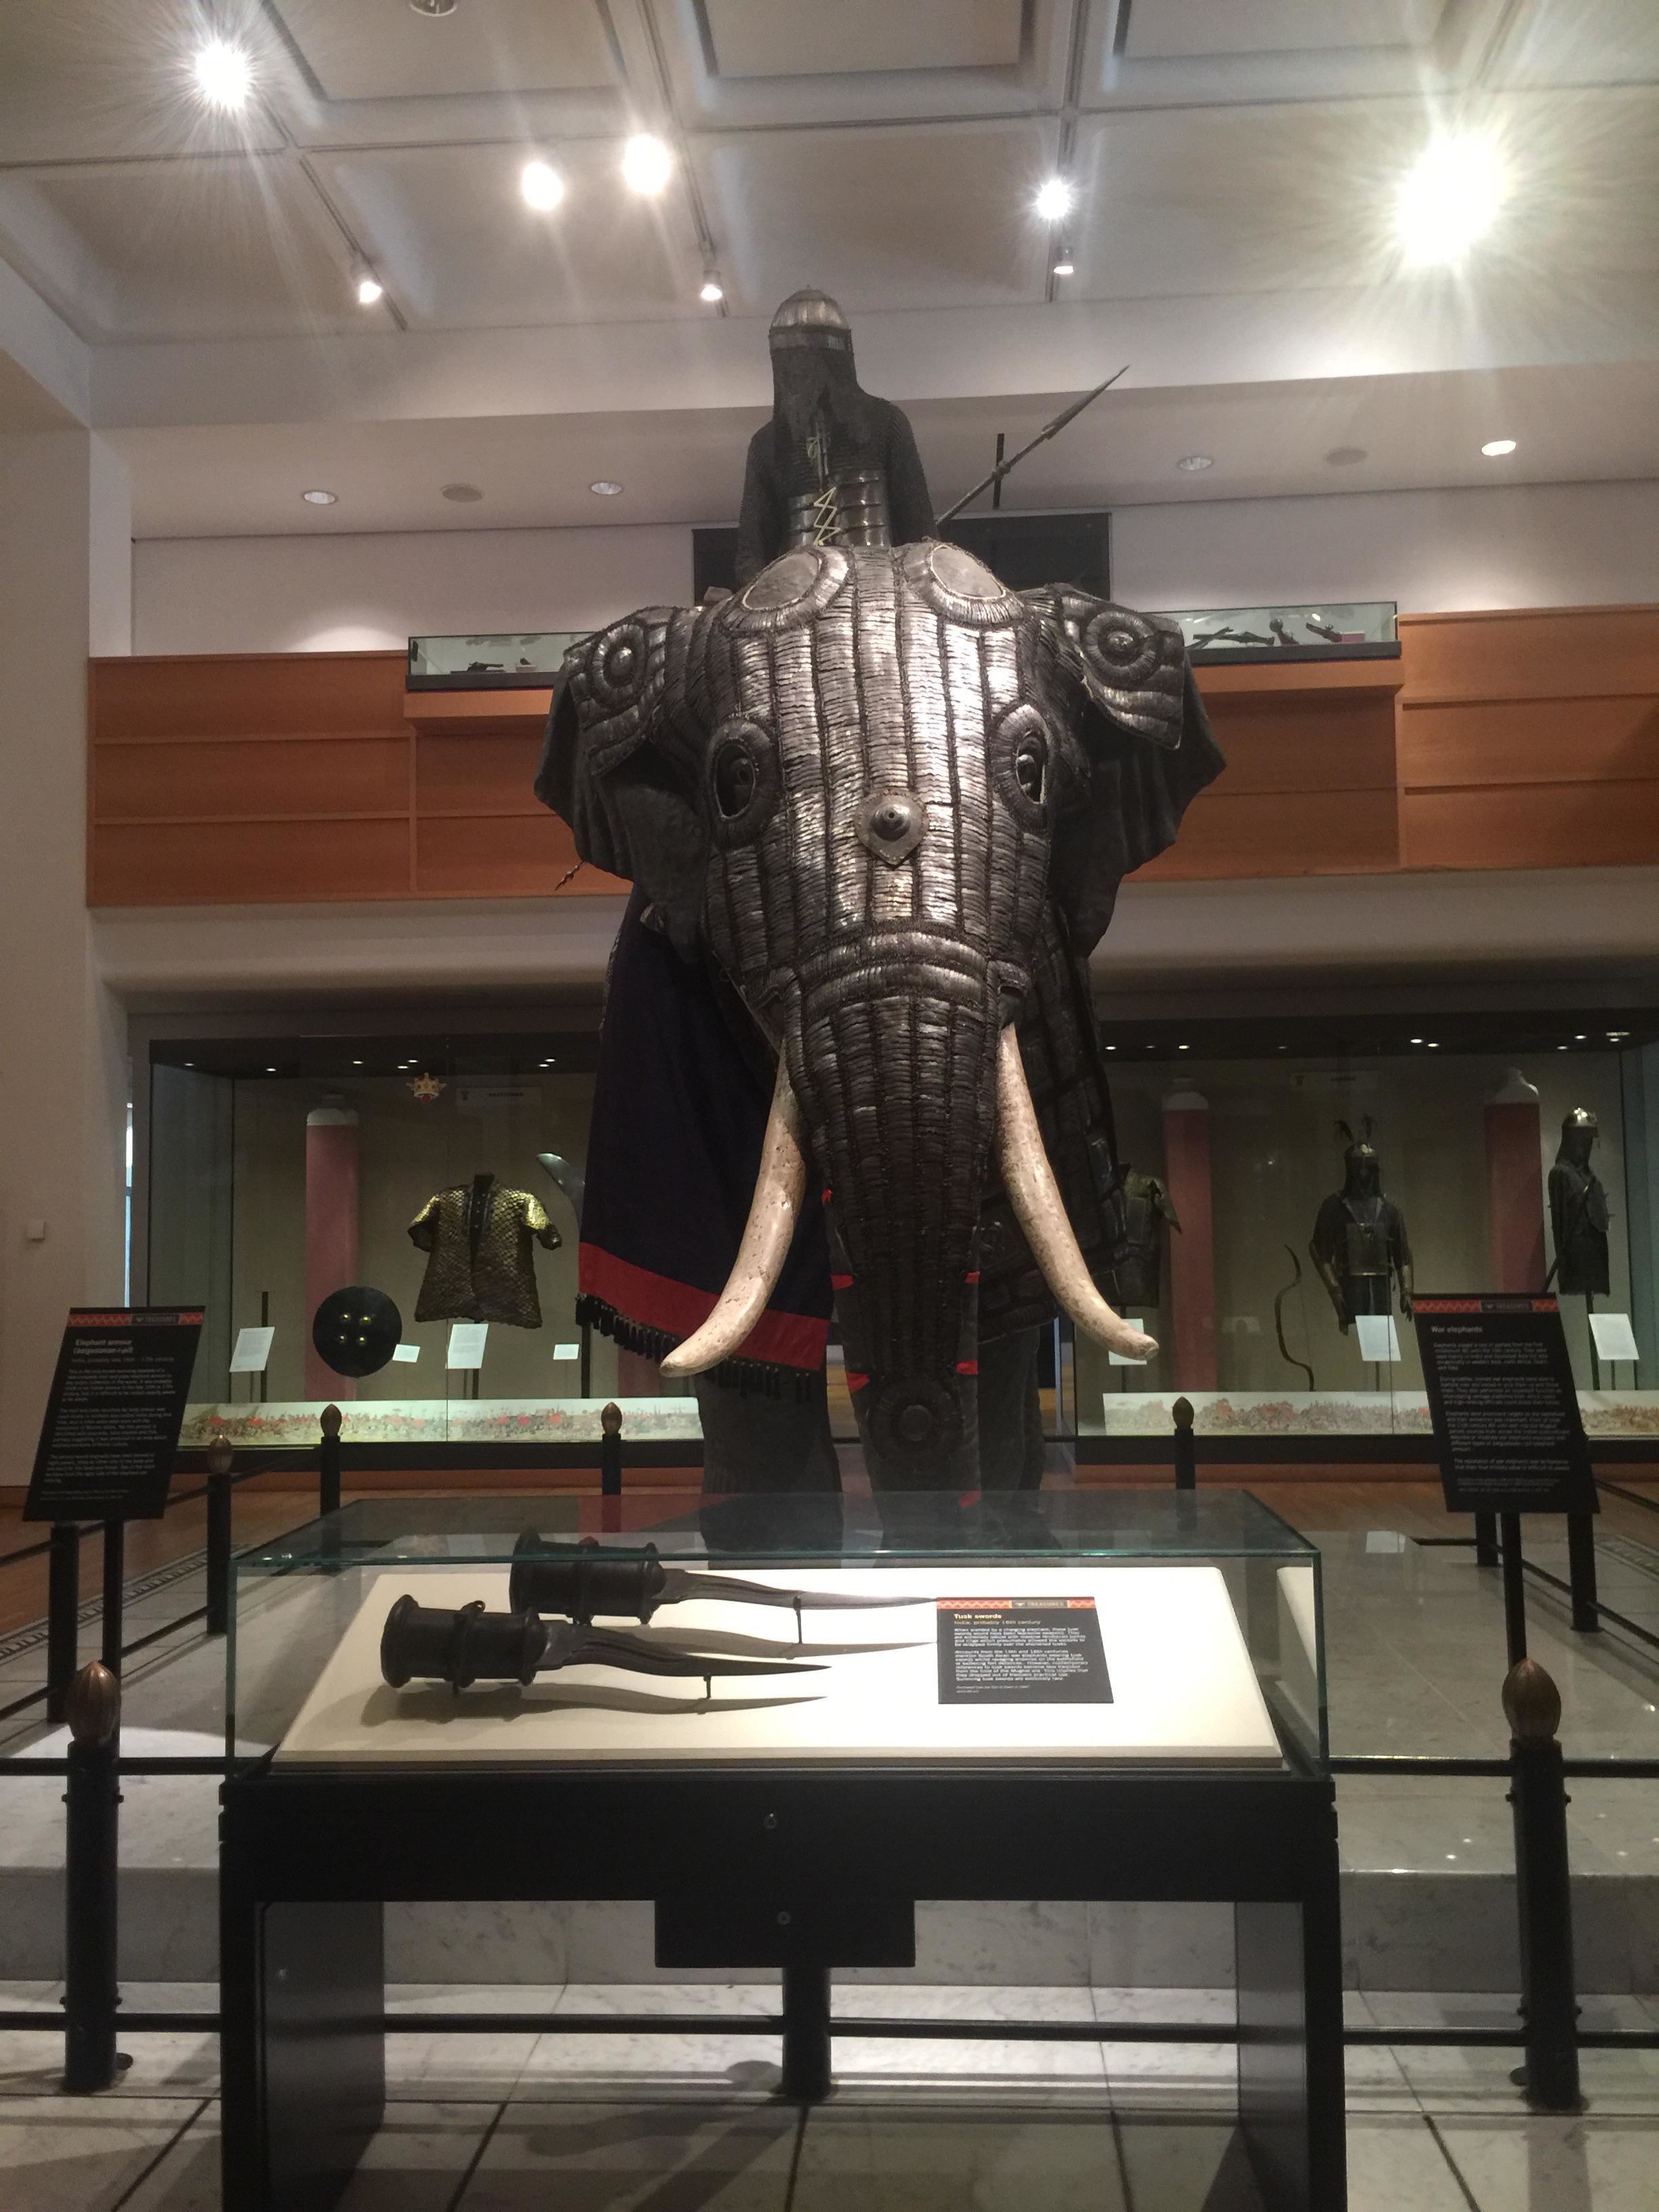 A suit of elephant armor